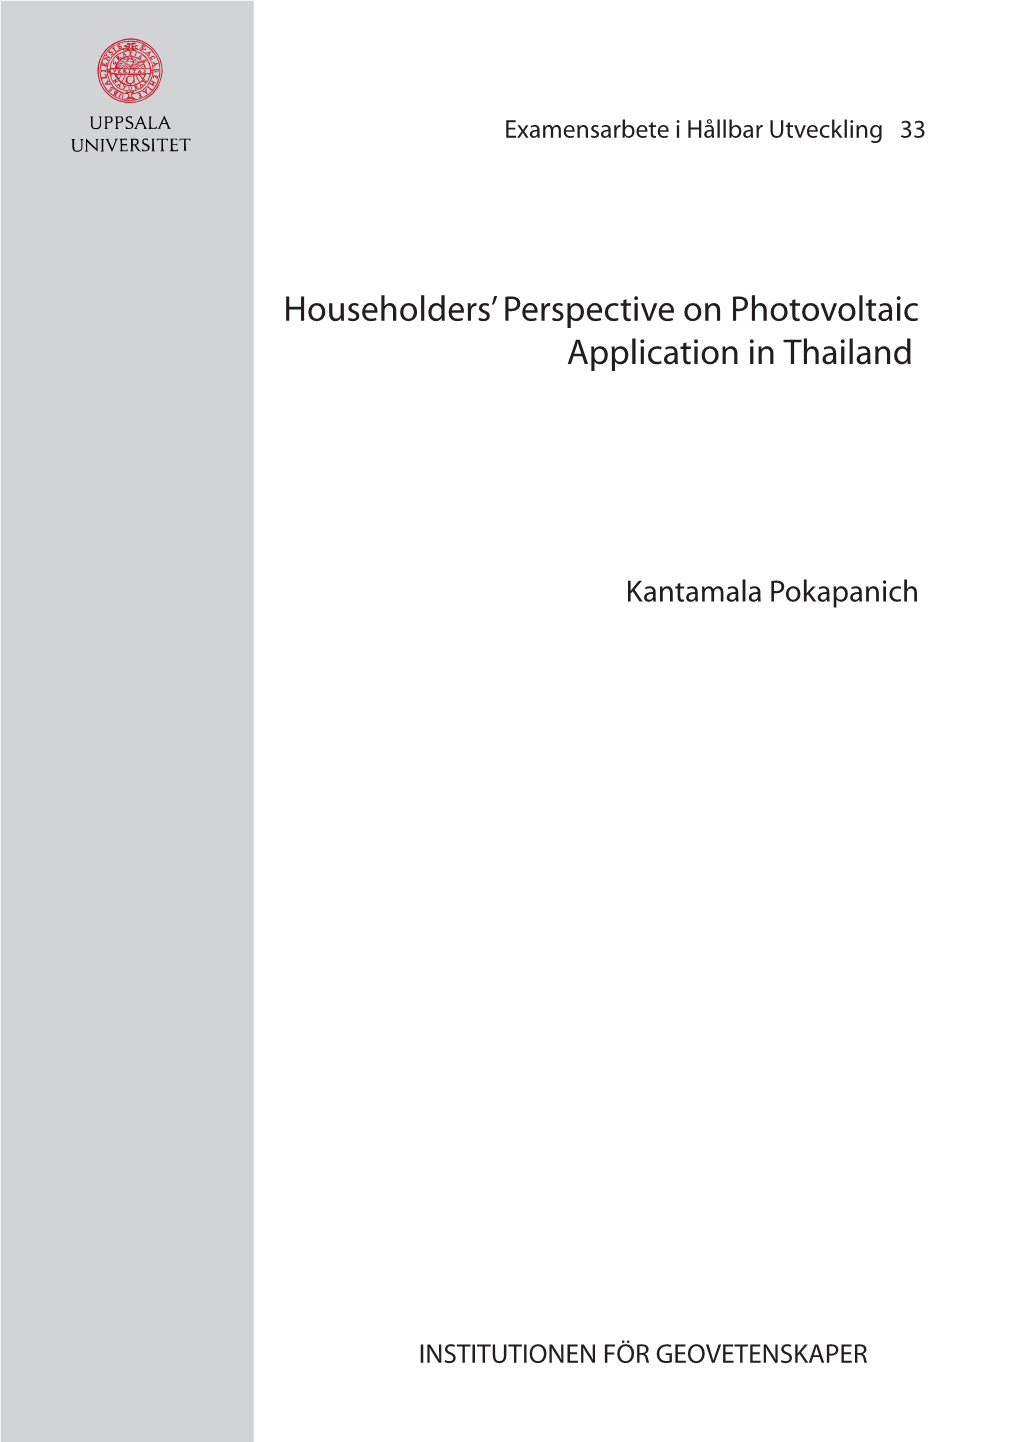 Householders' Perspective on Photovoltaic Application in Thailand